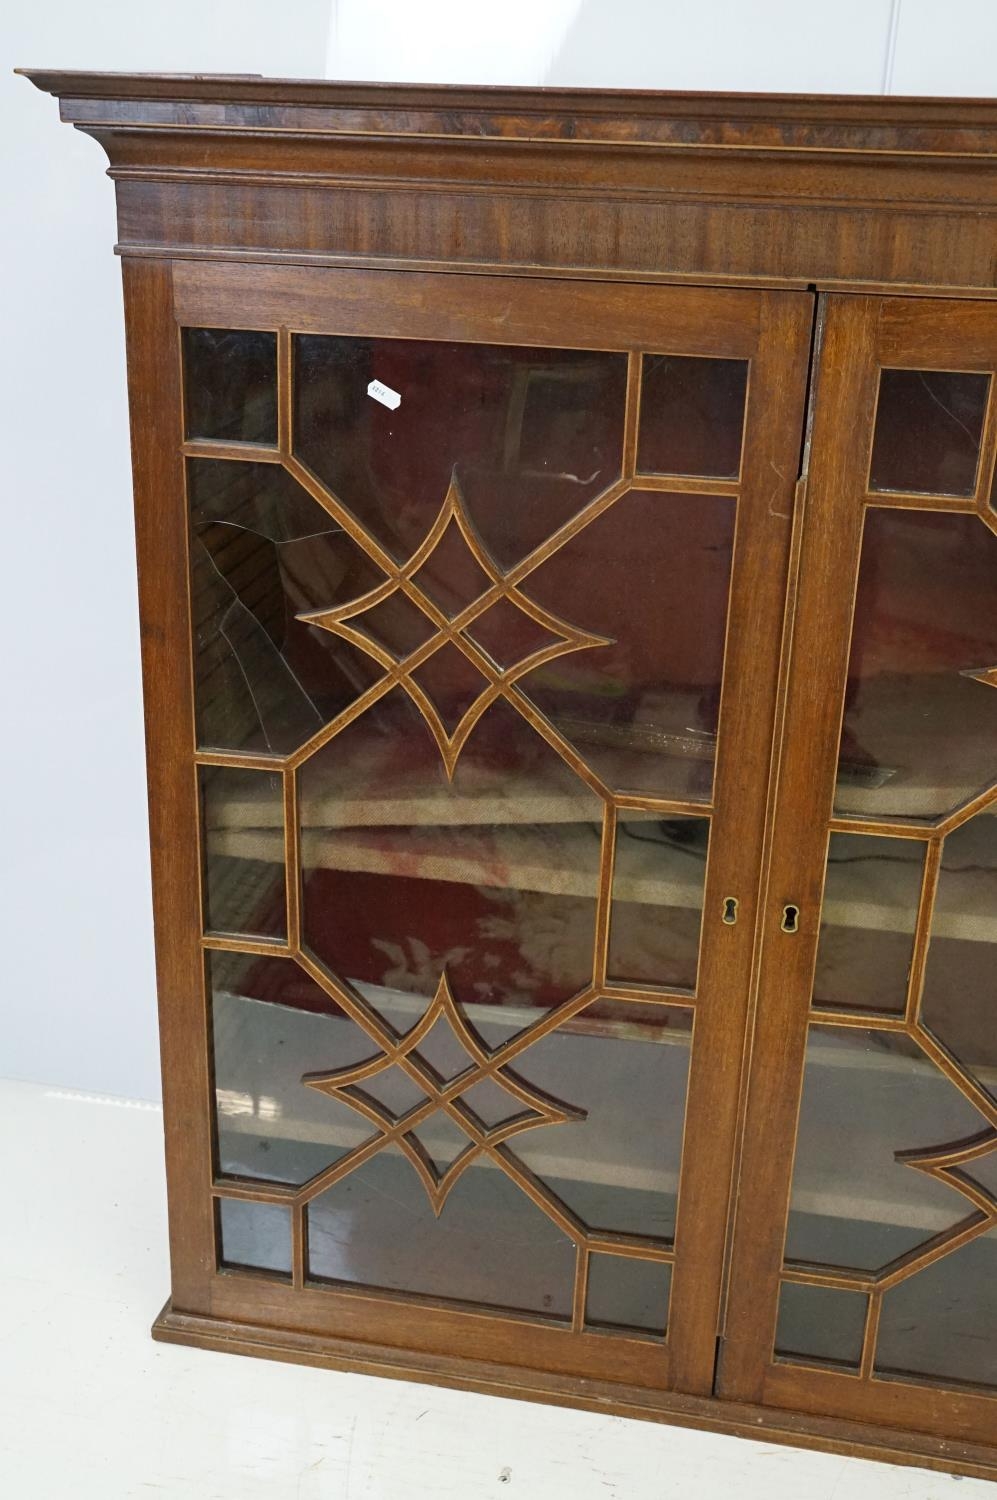 20th century mahogany astragal glazed two door display cabinet fitted with three shelves, 107cm high - Image 5 of 10